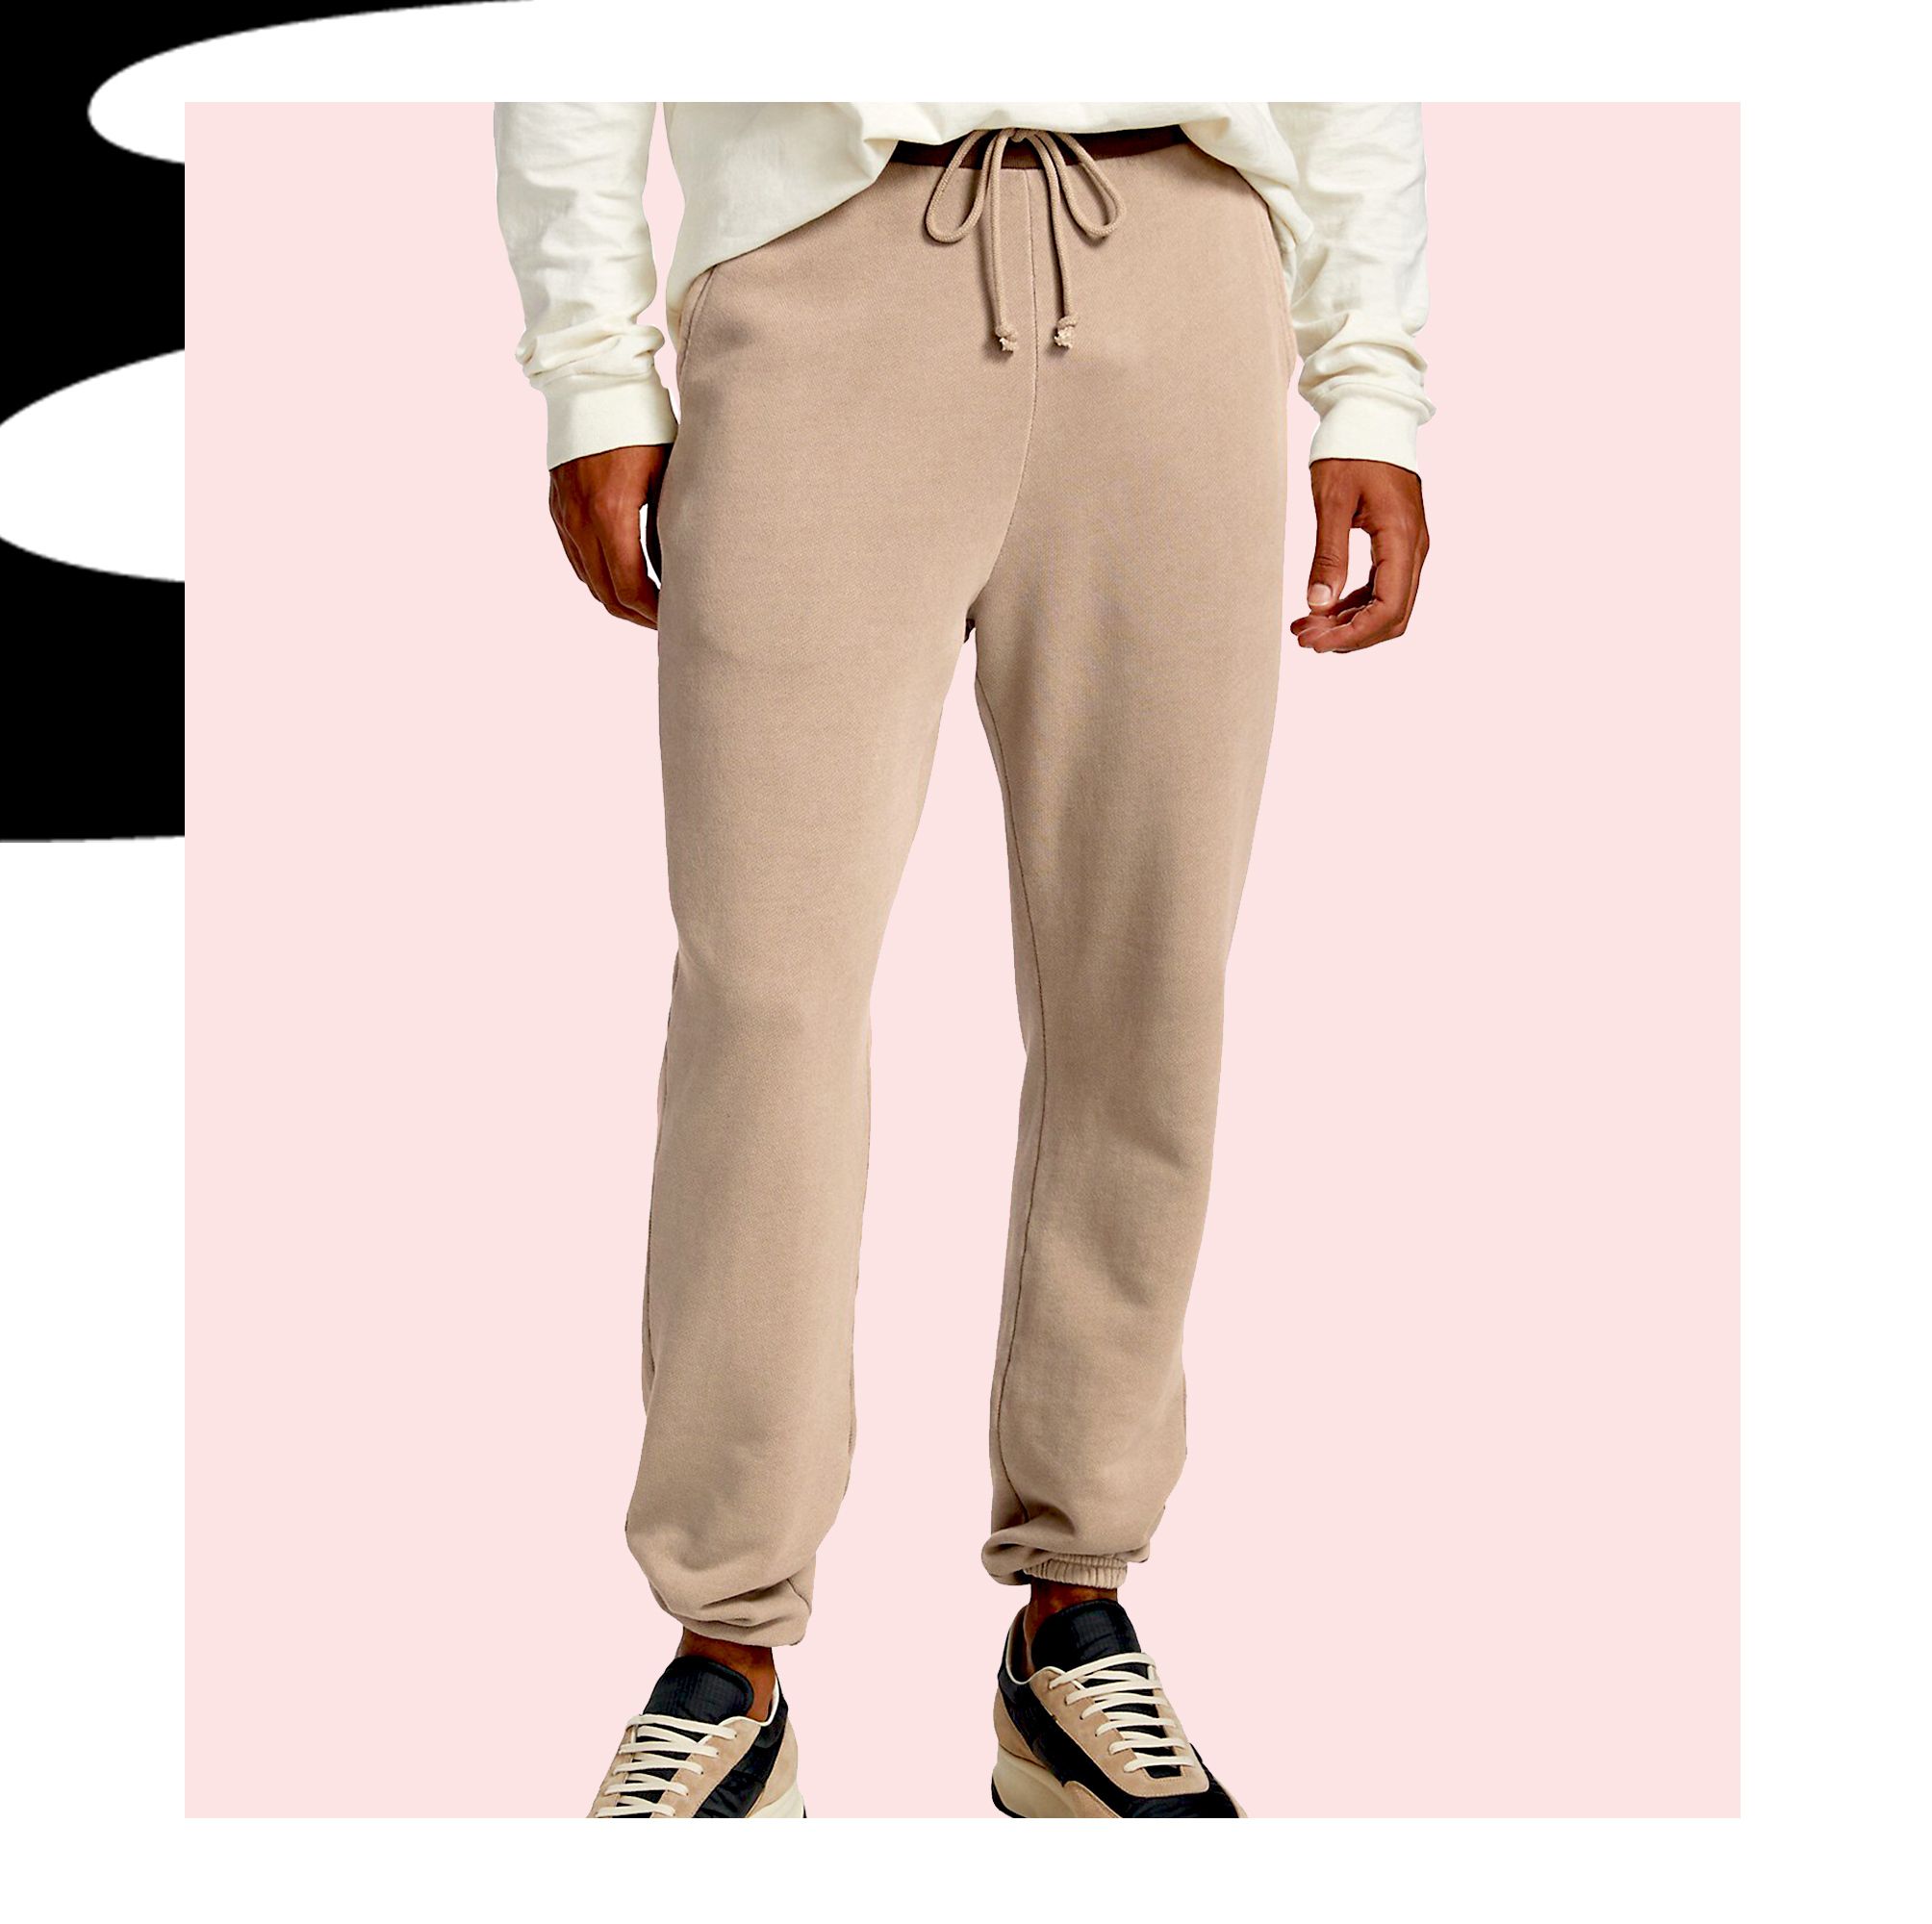 The 40 Best Sweatpants to Wear Indoors, Outdoors, and Everywhere in Between